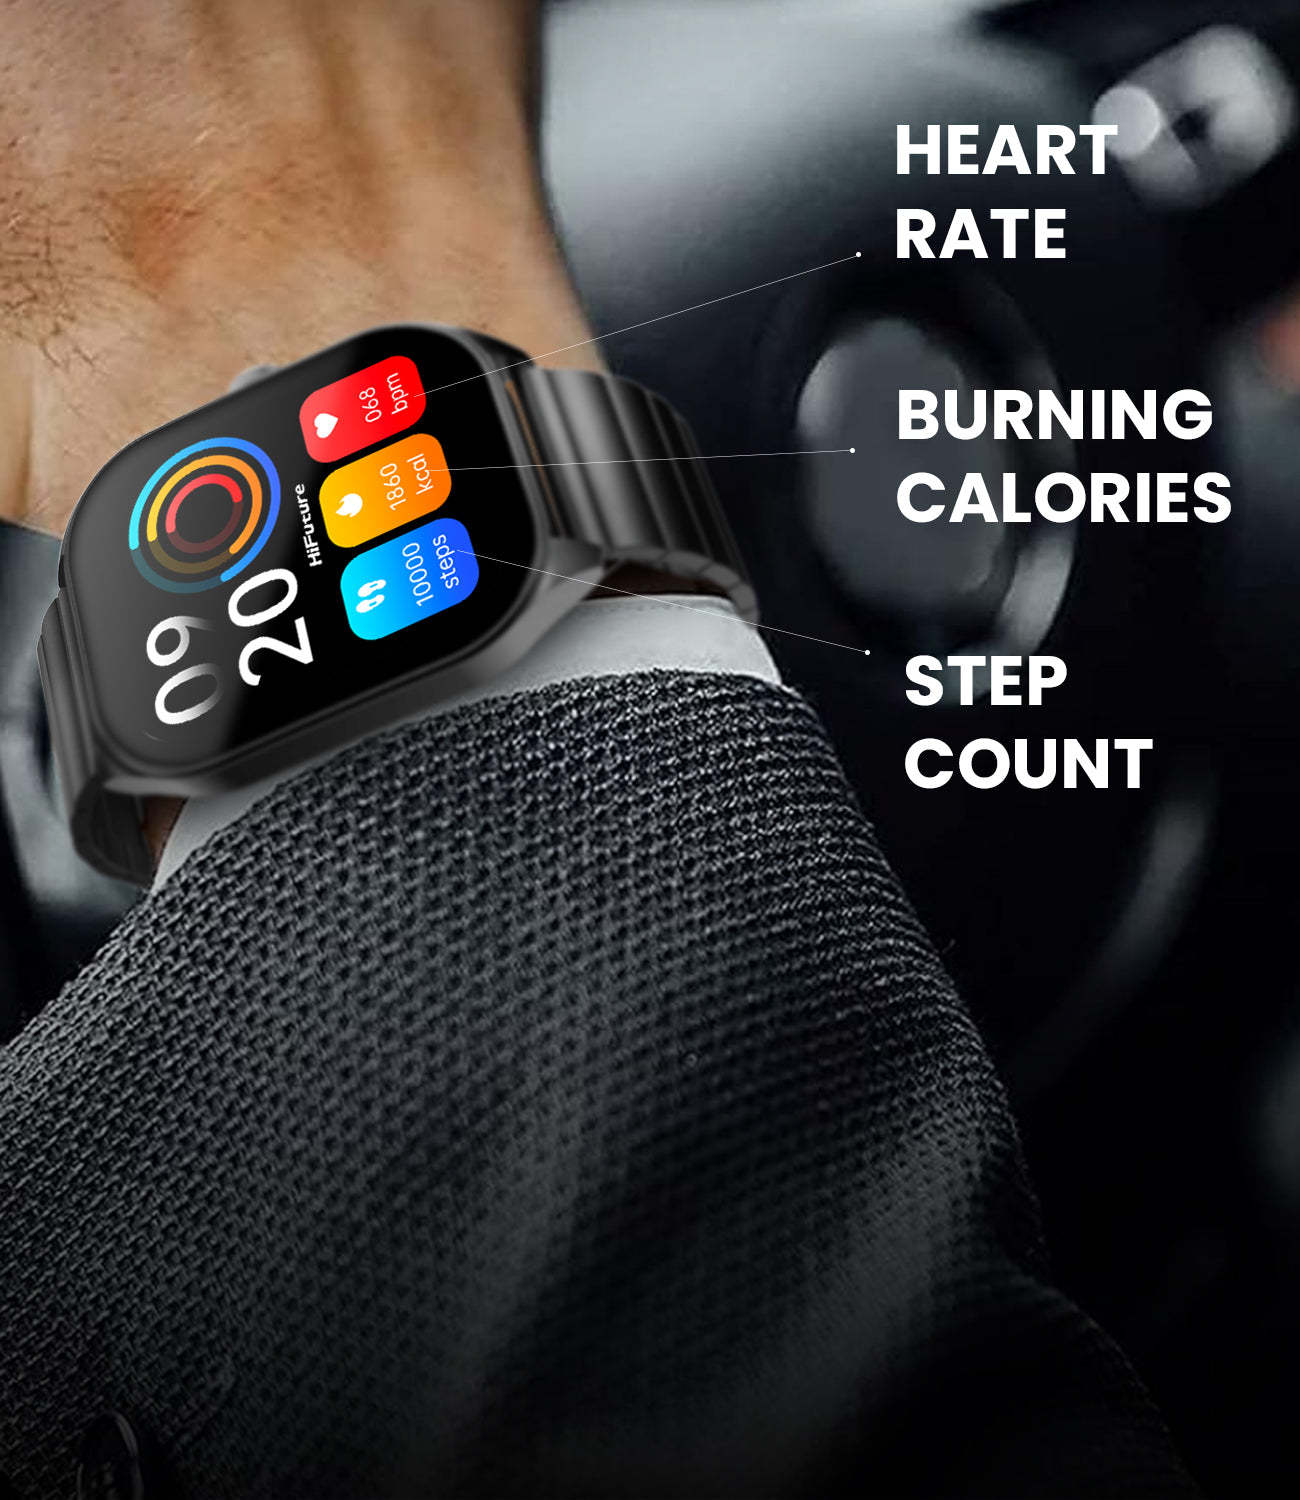 Step count and heart rate monitoring Apex Smartwatch 